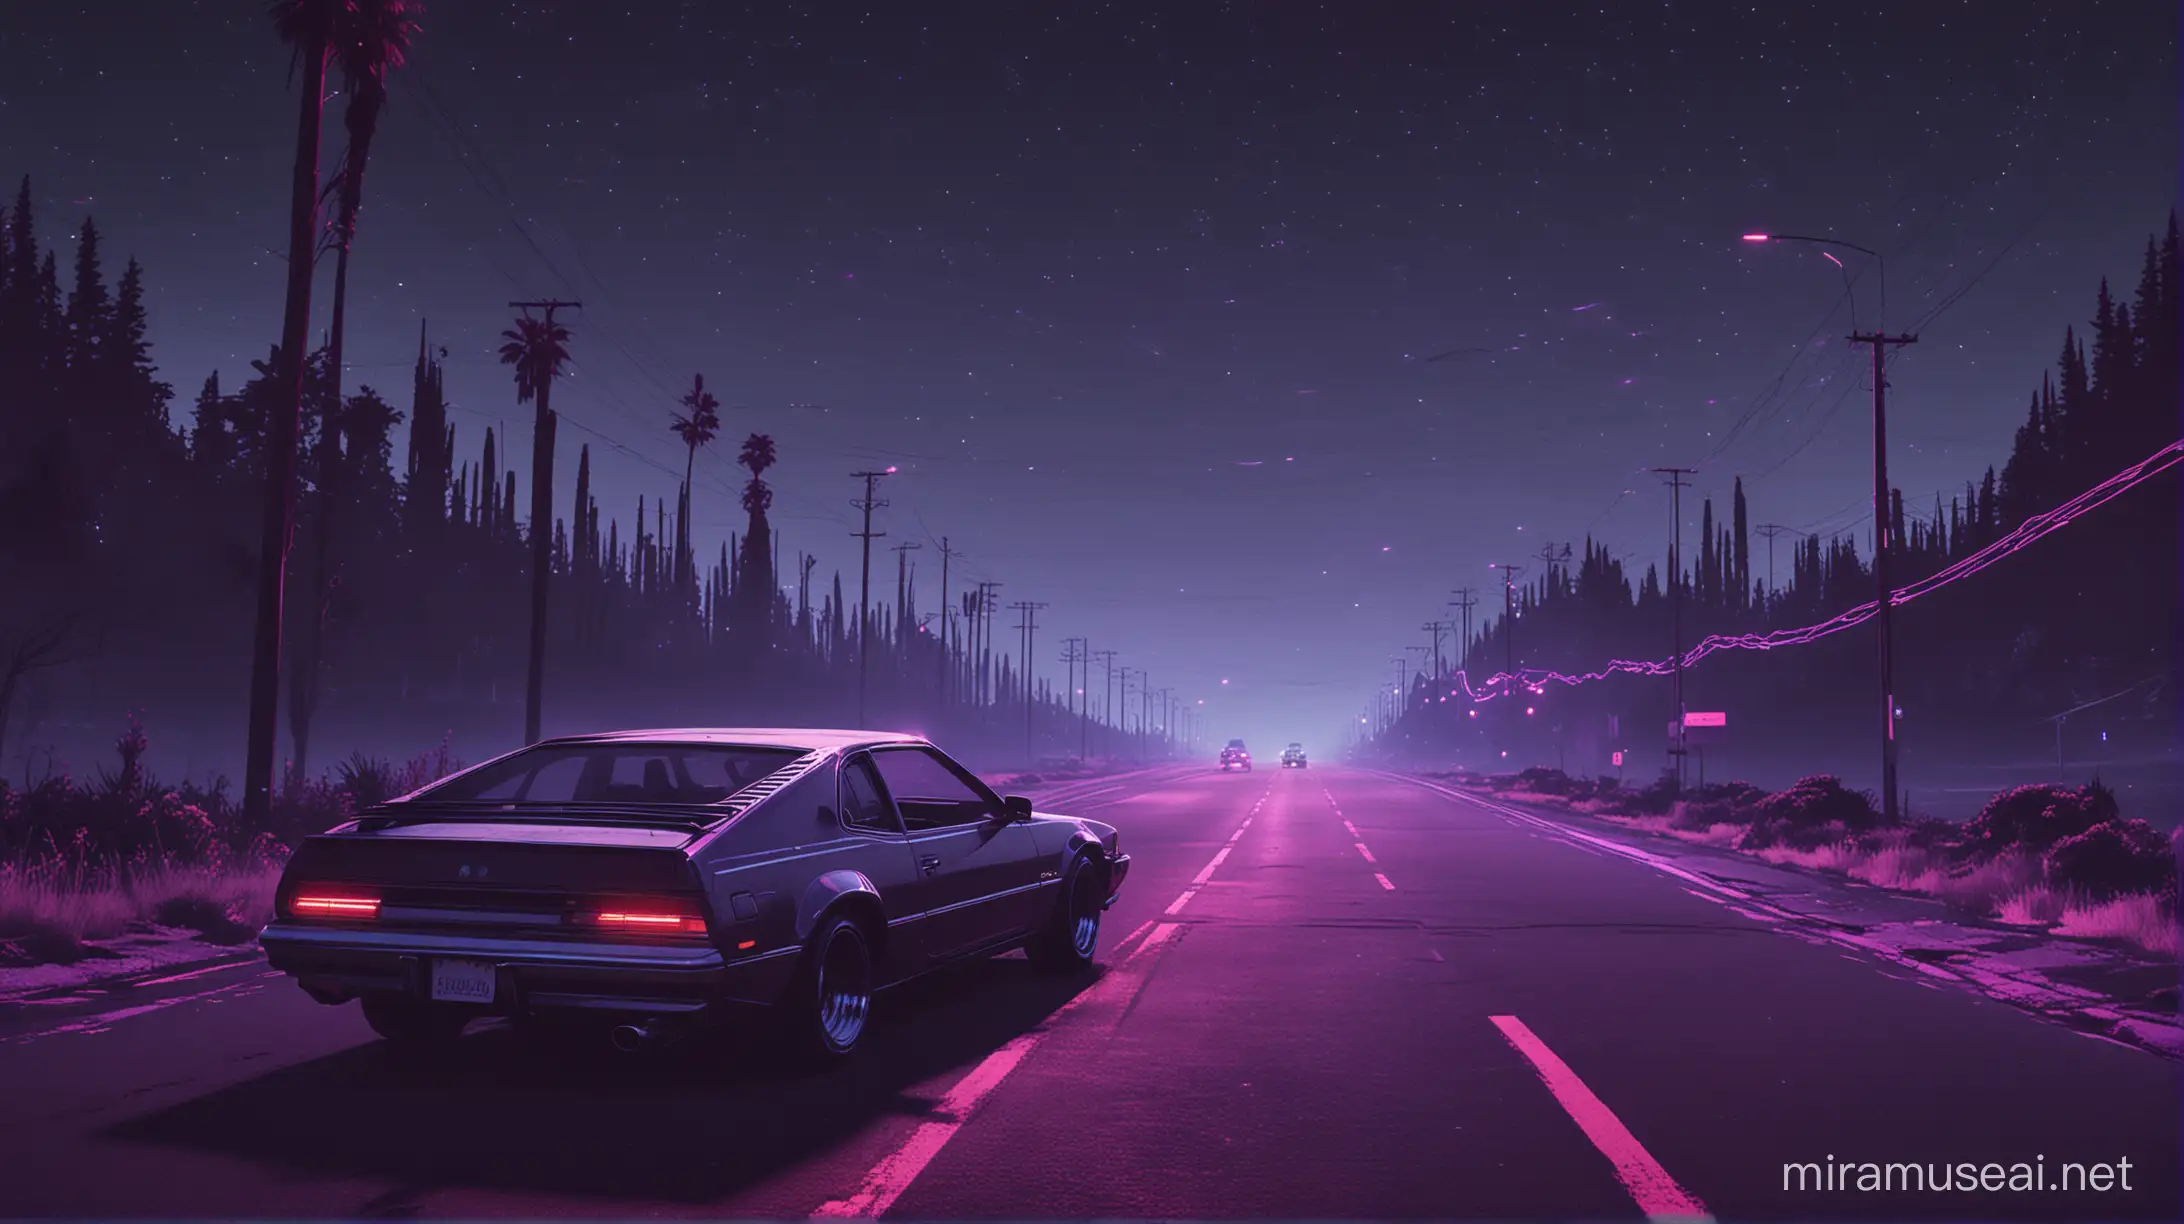 synthwave driveway
highway
abandonned city
dystopia
night
dark
synthwave car